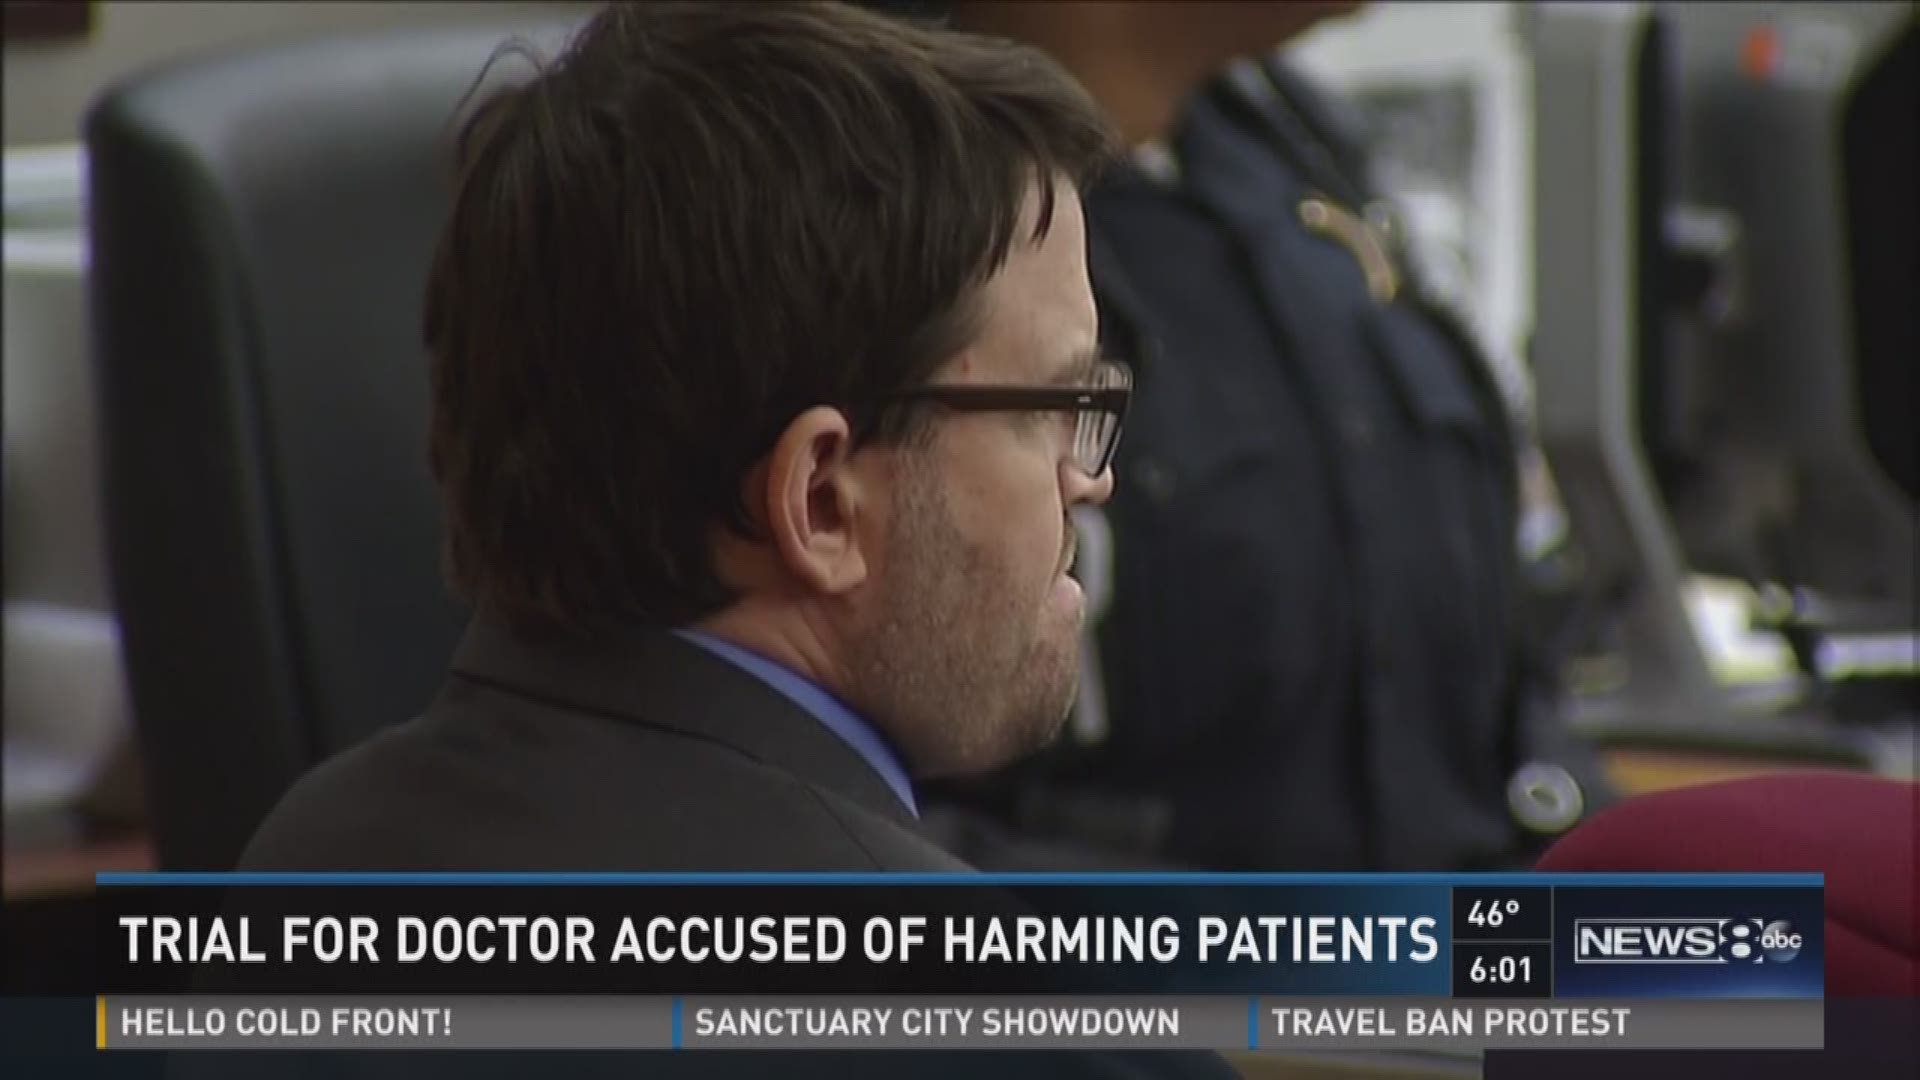 TRIAL FOR DOCTOR ACCUSED OF HARMING PATIENTS